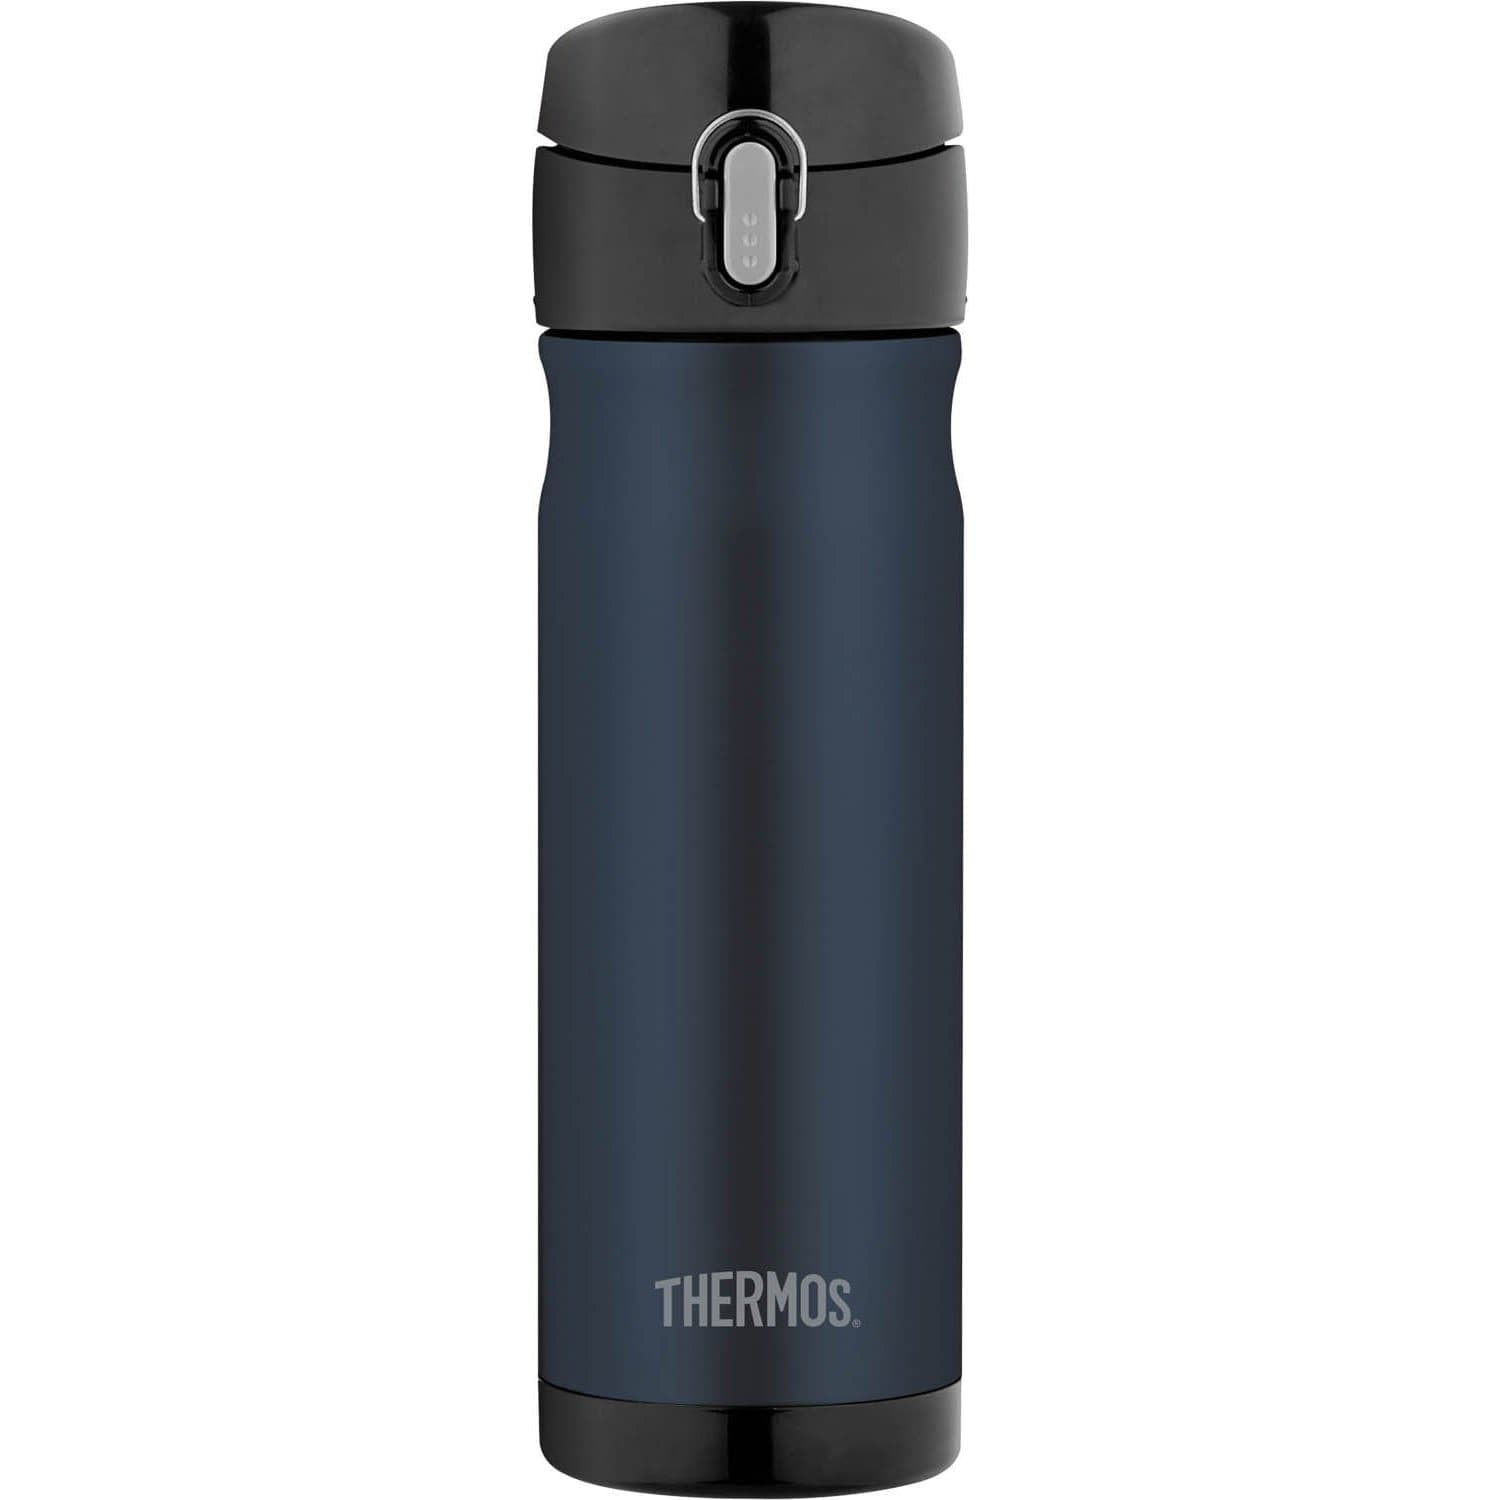 Thermos Jmw500Mb4 Stainless Steel 